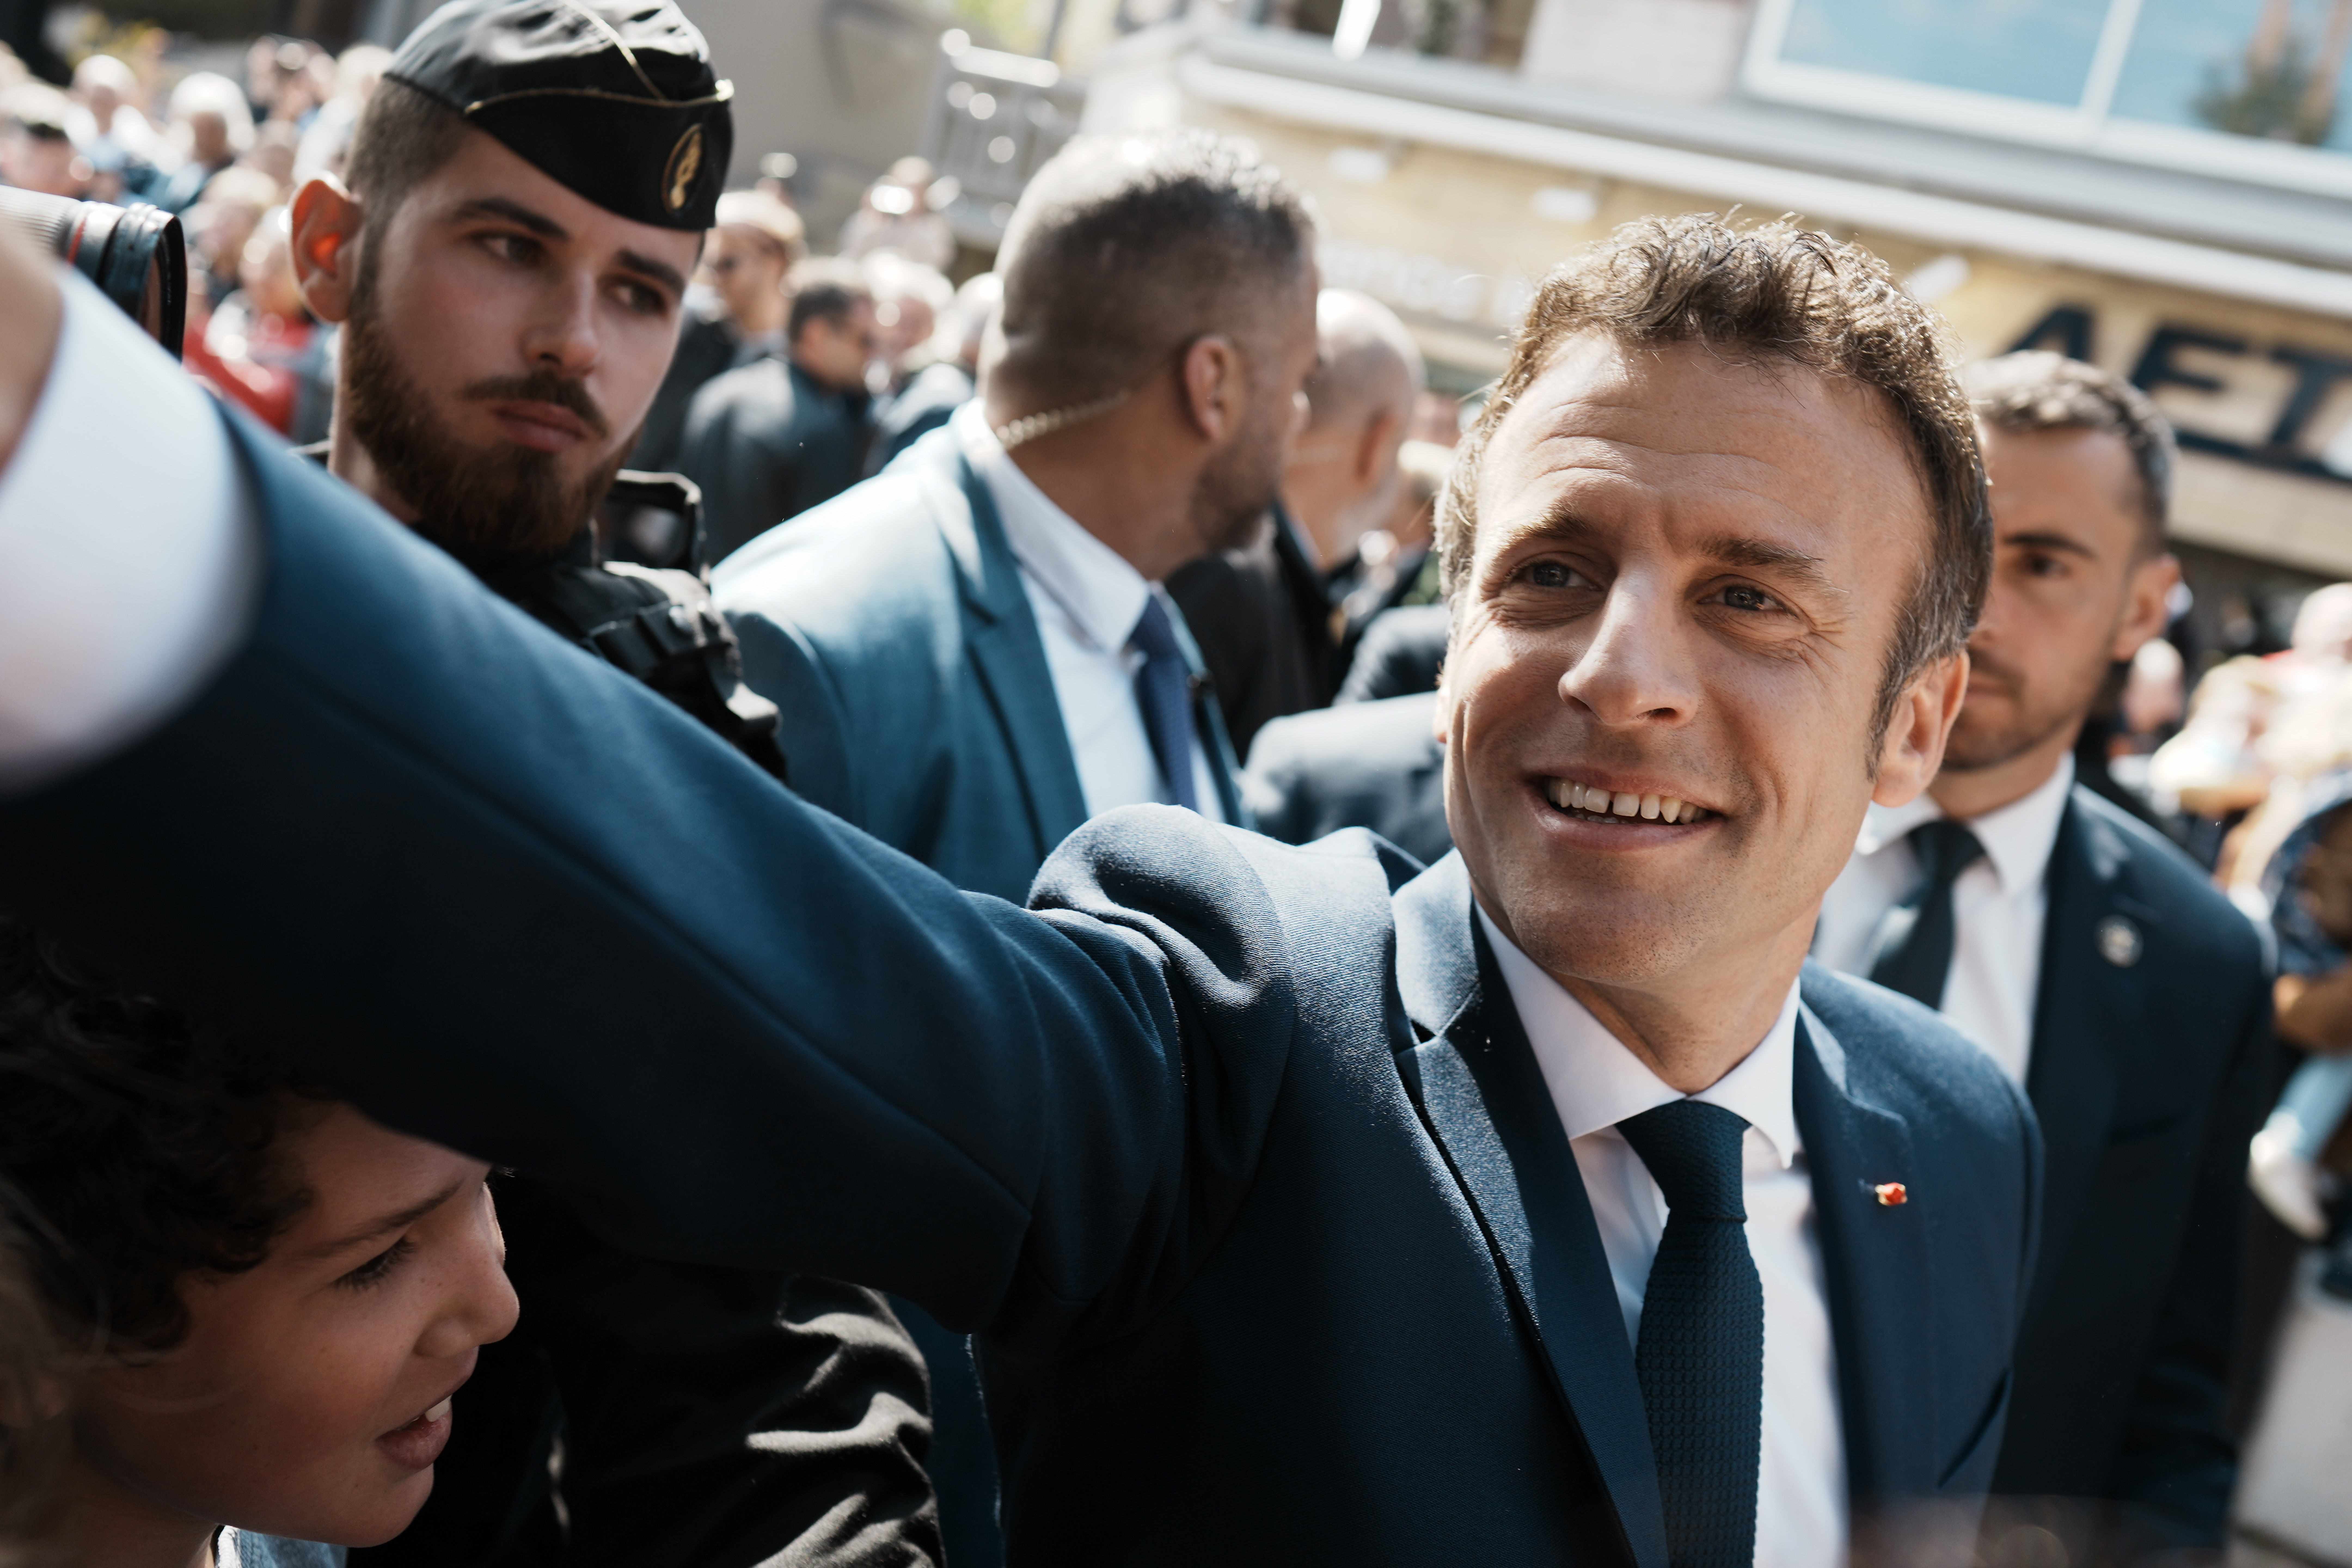 French President and centrist candidate Emmanuel Macron shakes hands with well-wishers as he heads to the polling station in Le Touquet, northern France